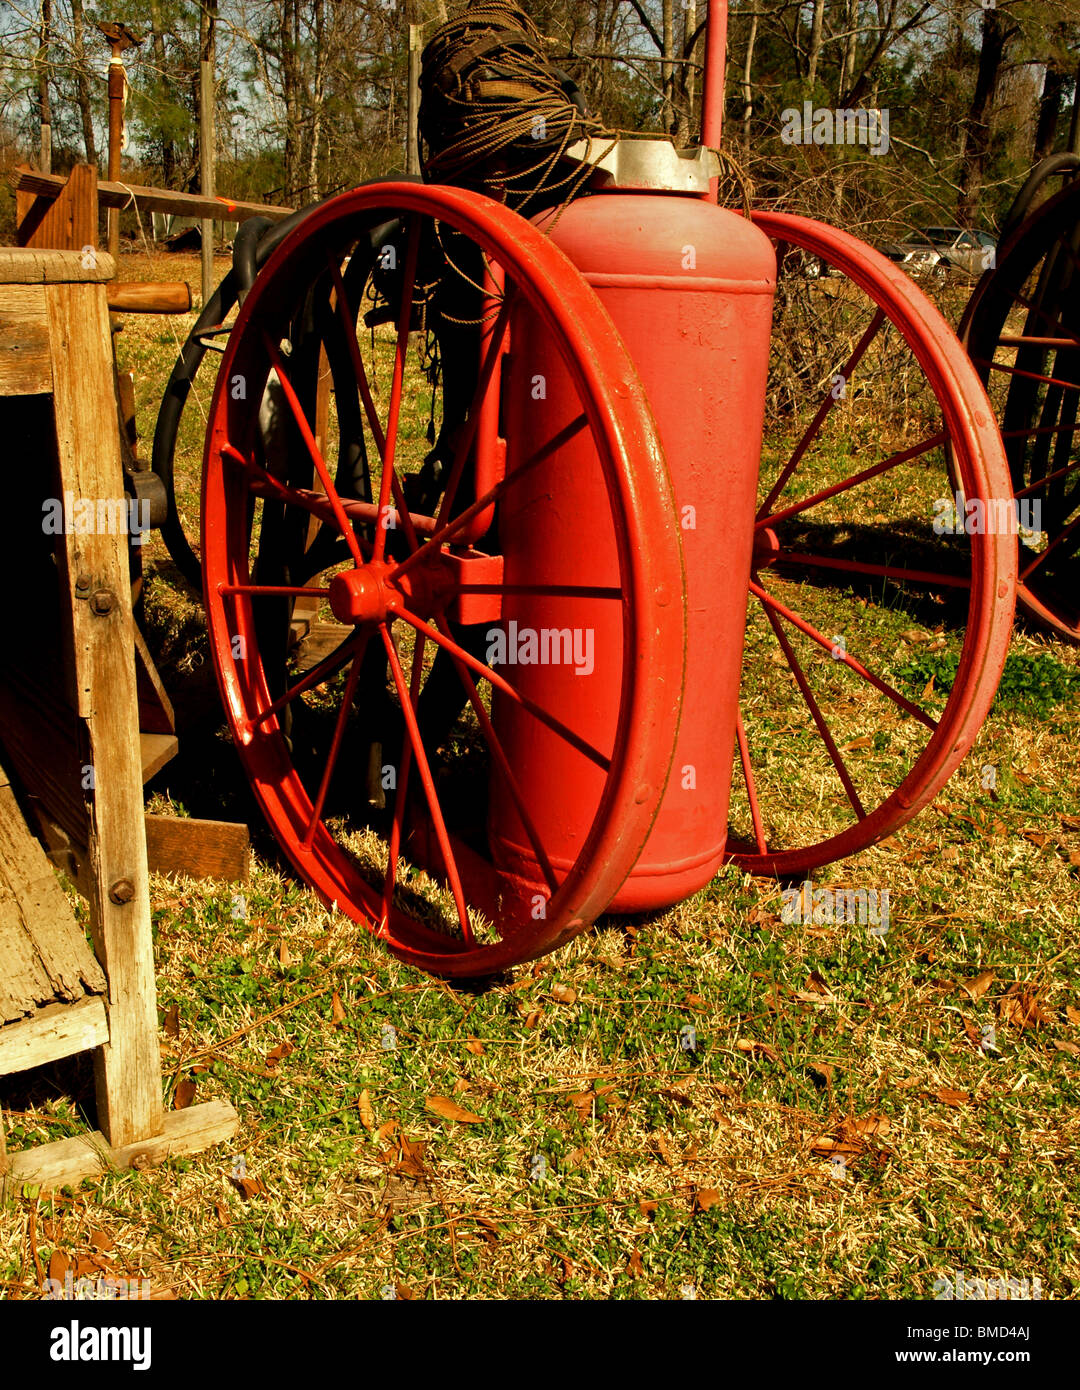 propane gas air compressor tank old red on large wheels sitting in a field Stock Photo